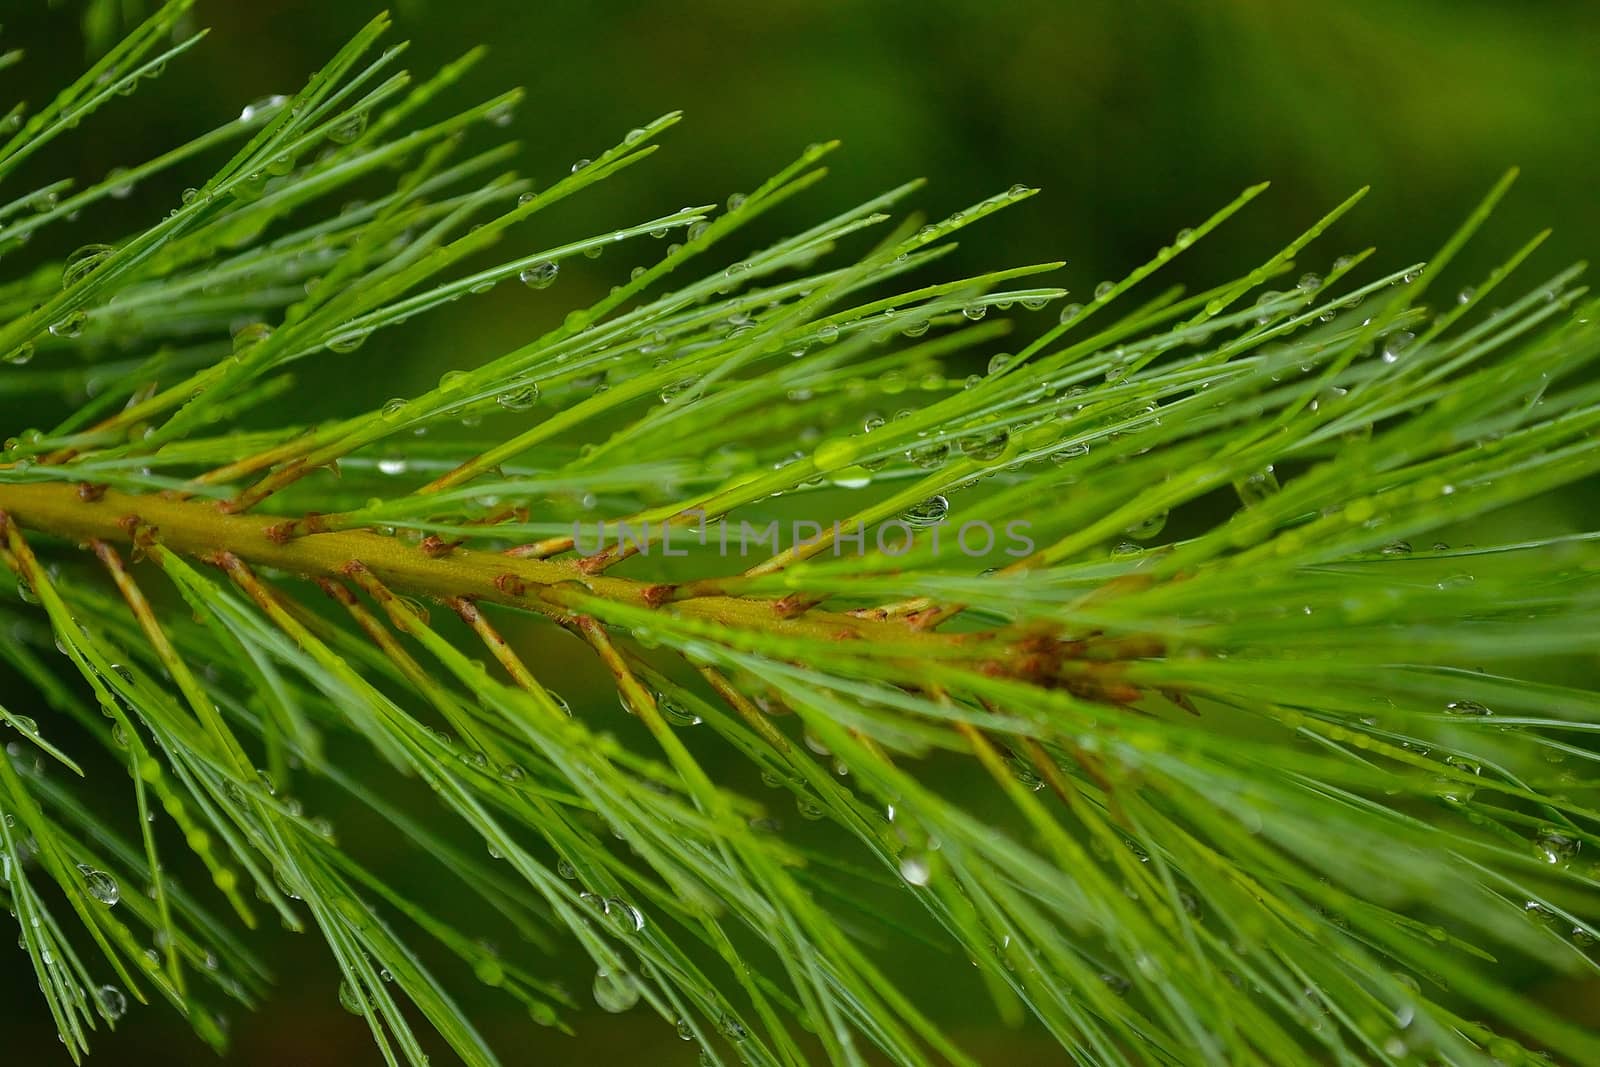 Picture of a small branch of a pine after a storm